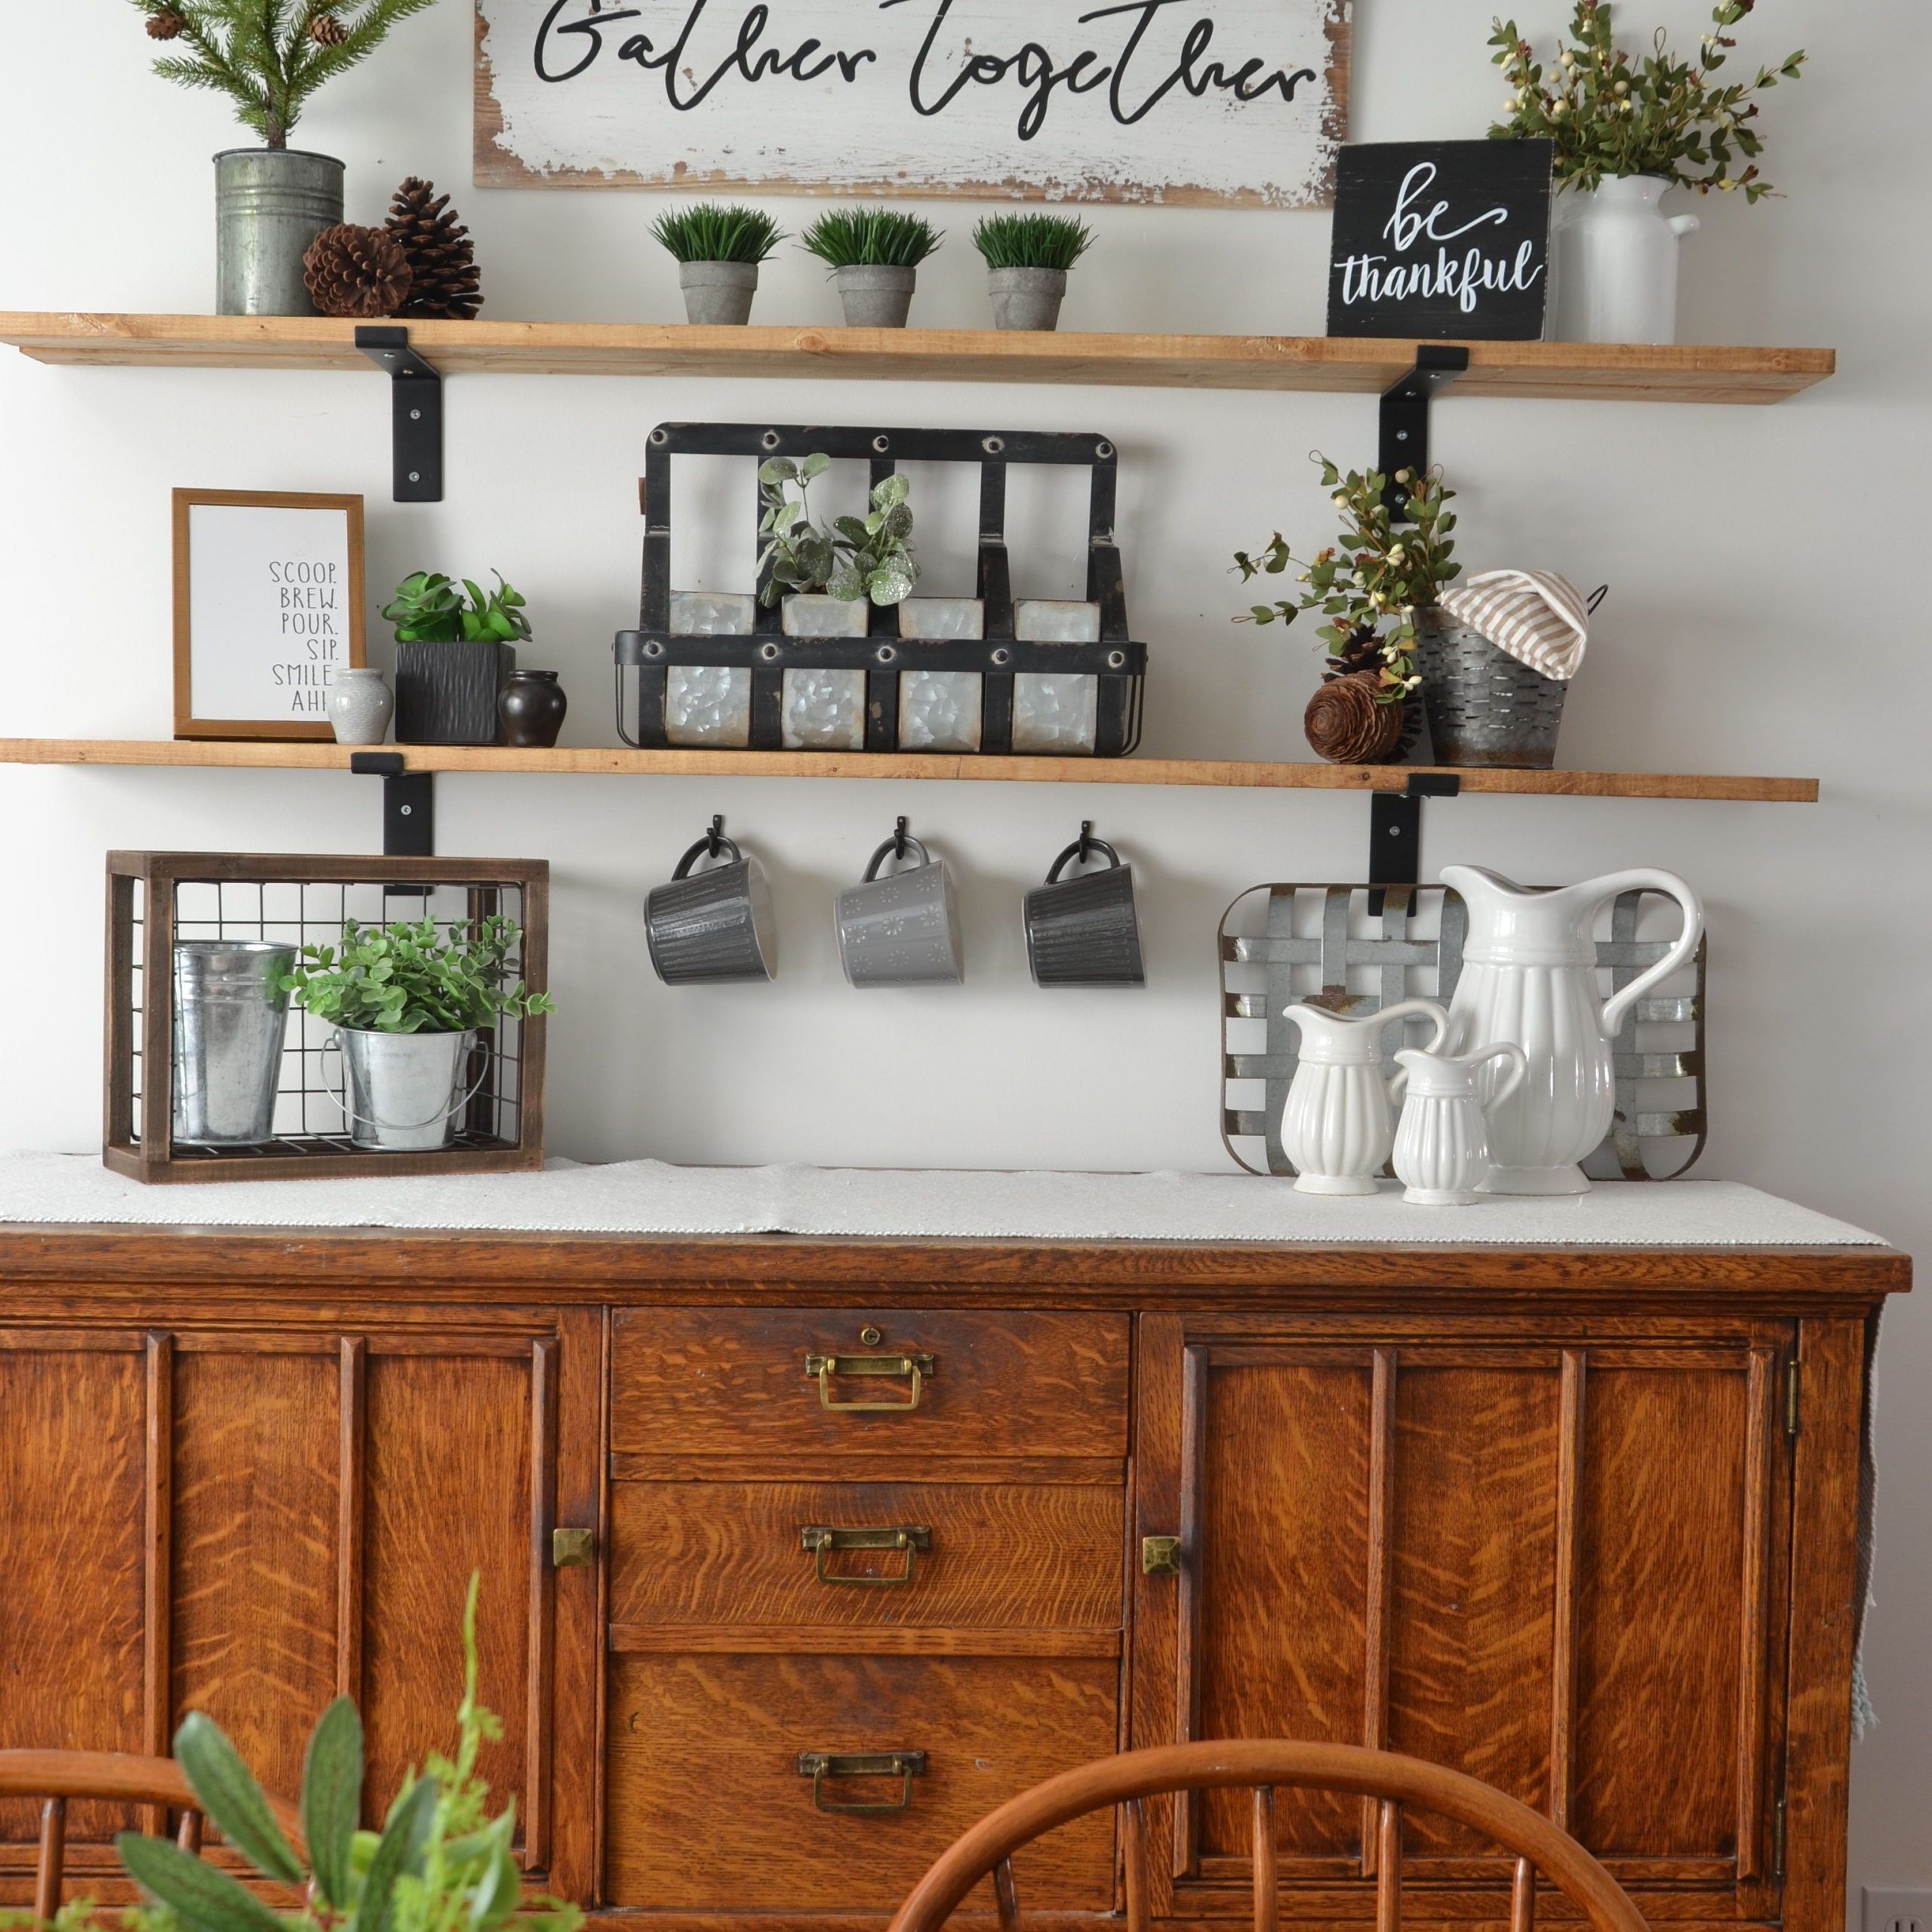 How To Make Fixer Upper Style Farmhouse Shelves | Farmhouse Shelves Diy With Farmhouse Stands With Shelves (Gallery 5 of 20)